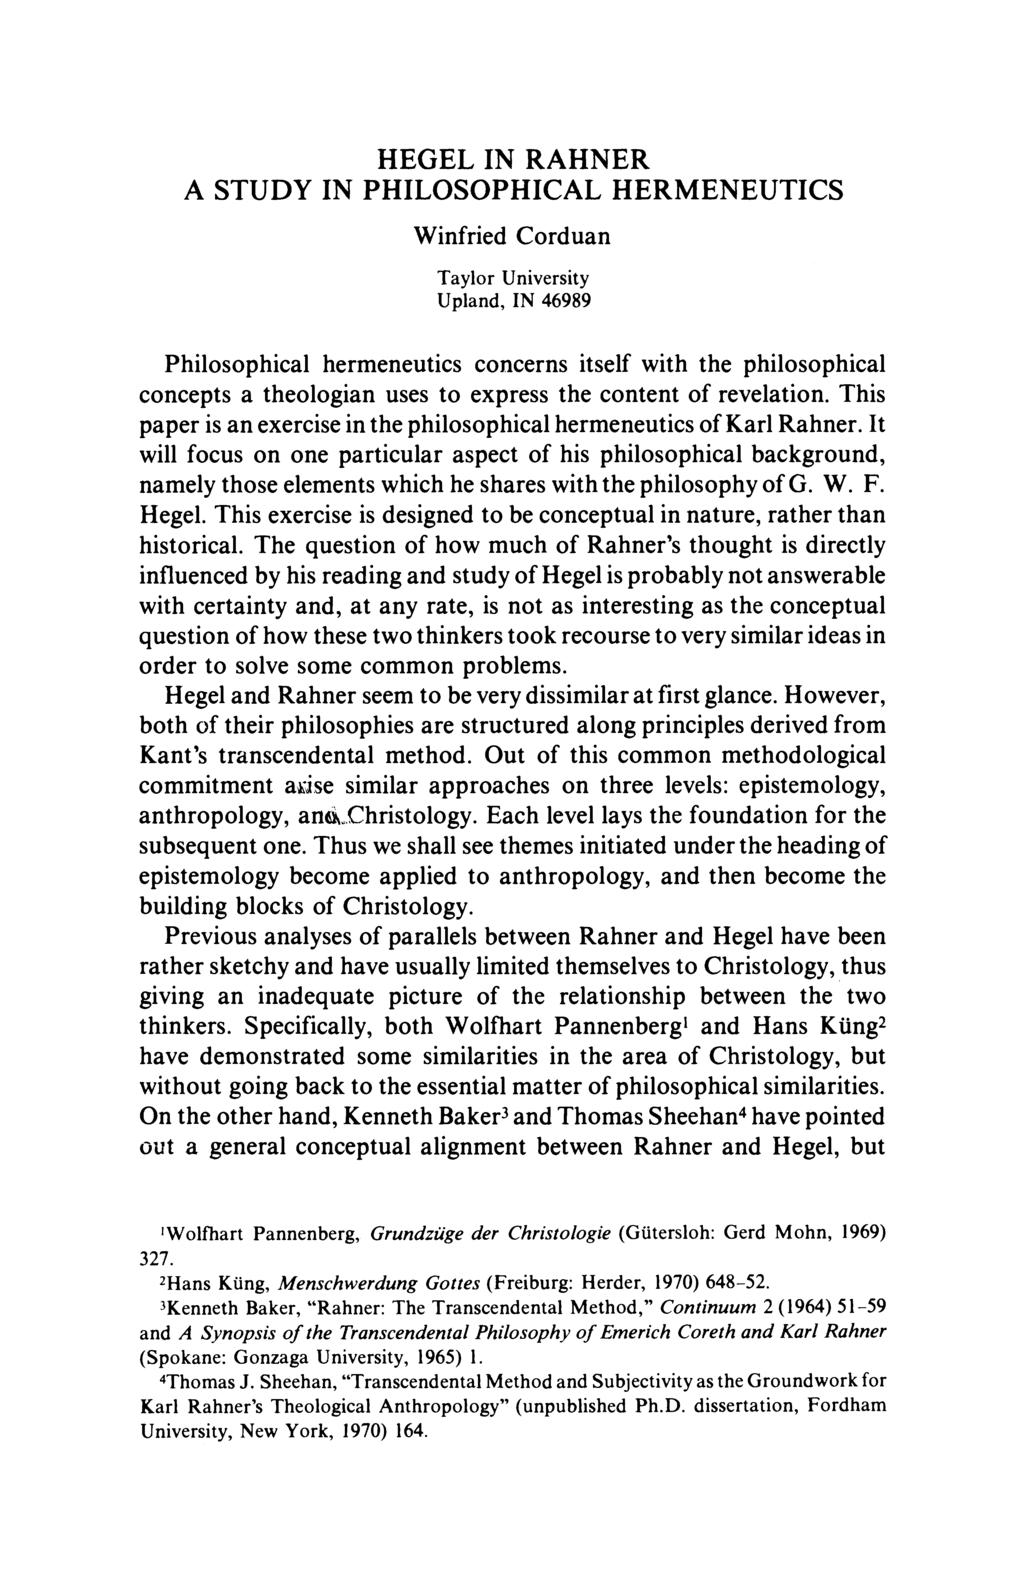 HEGEL IN RAHNER A STUDY IN PHILOSOPHICAL HERMENEUTICS Winfried Corduan Taylor University Upland, IN 46989 Philosophical hermeneutics concerns itself with the philosophical concepts a theologian uses